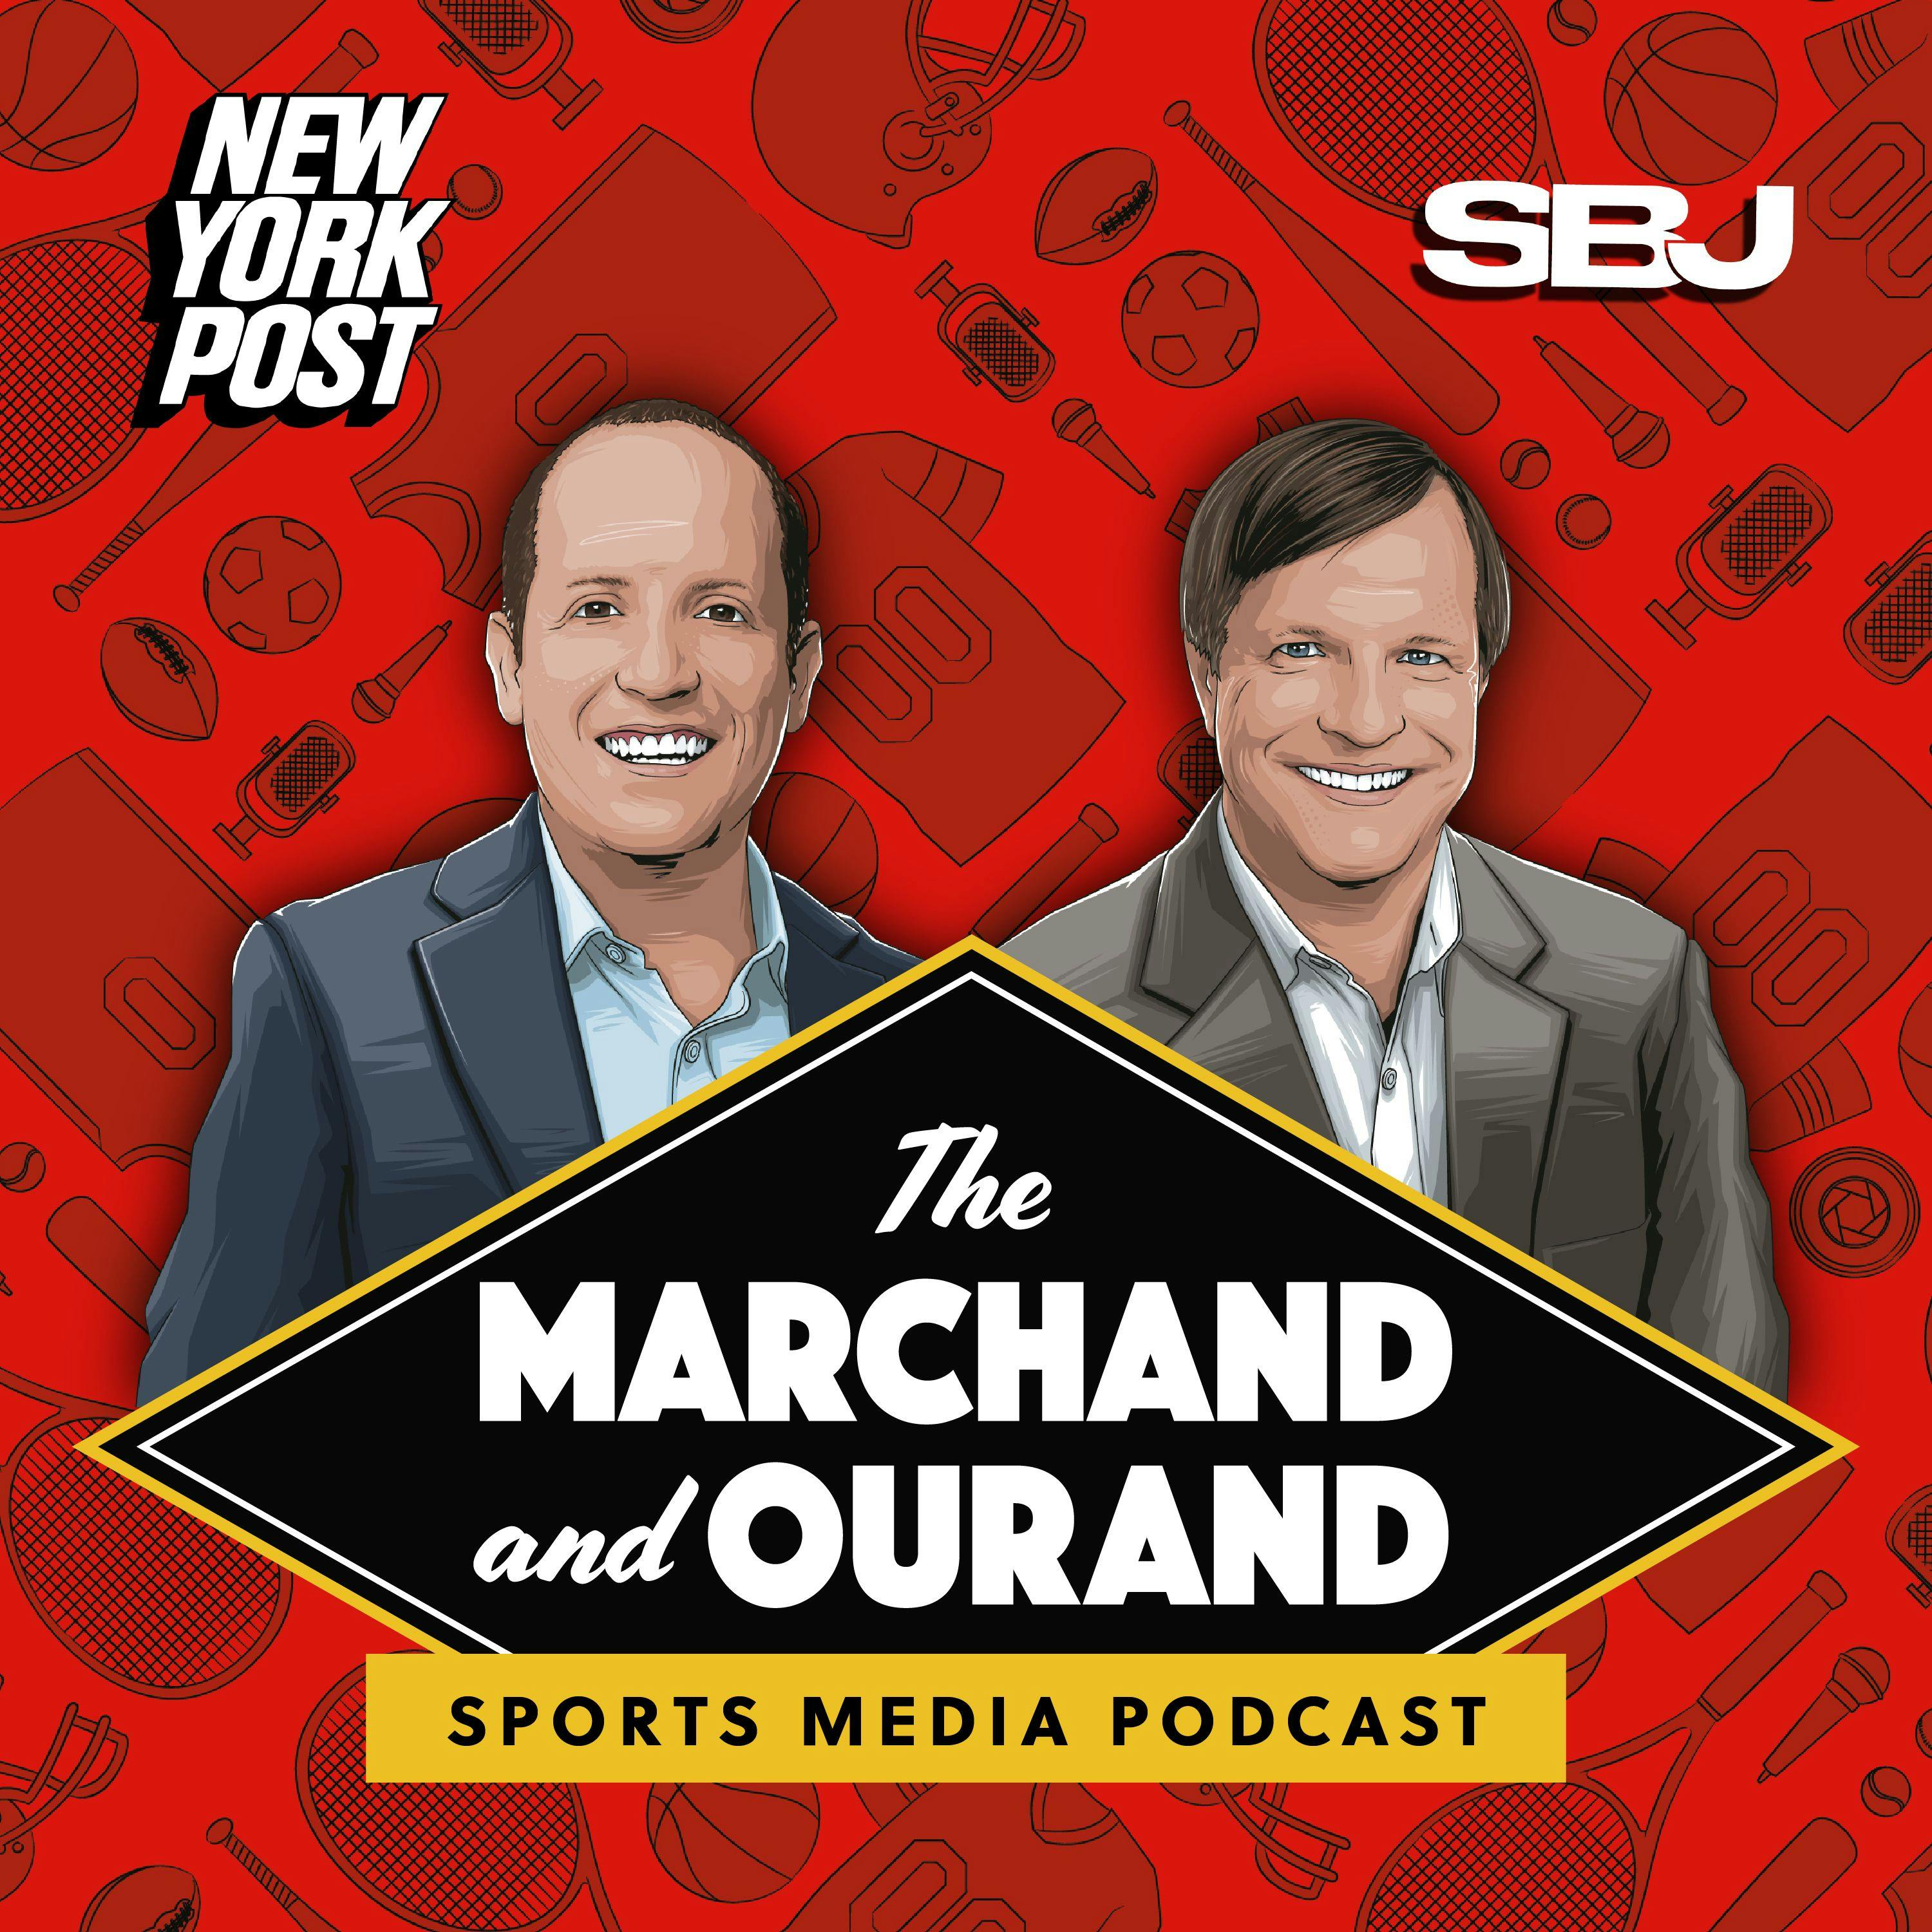 Presenting: The Marchand and Ourand Sports Media Podcast